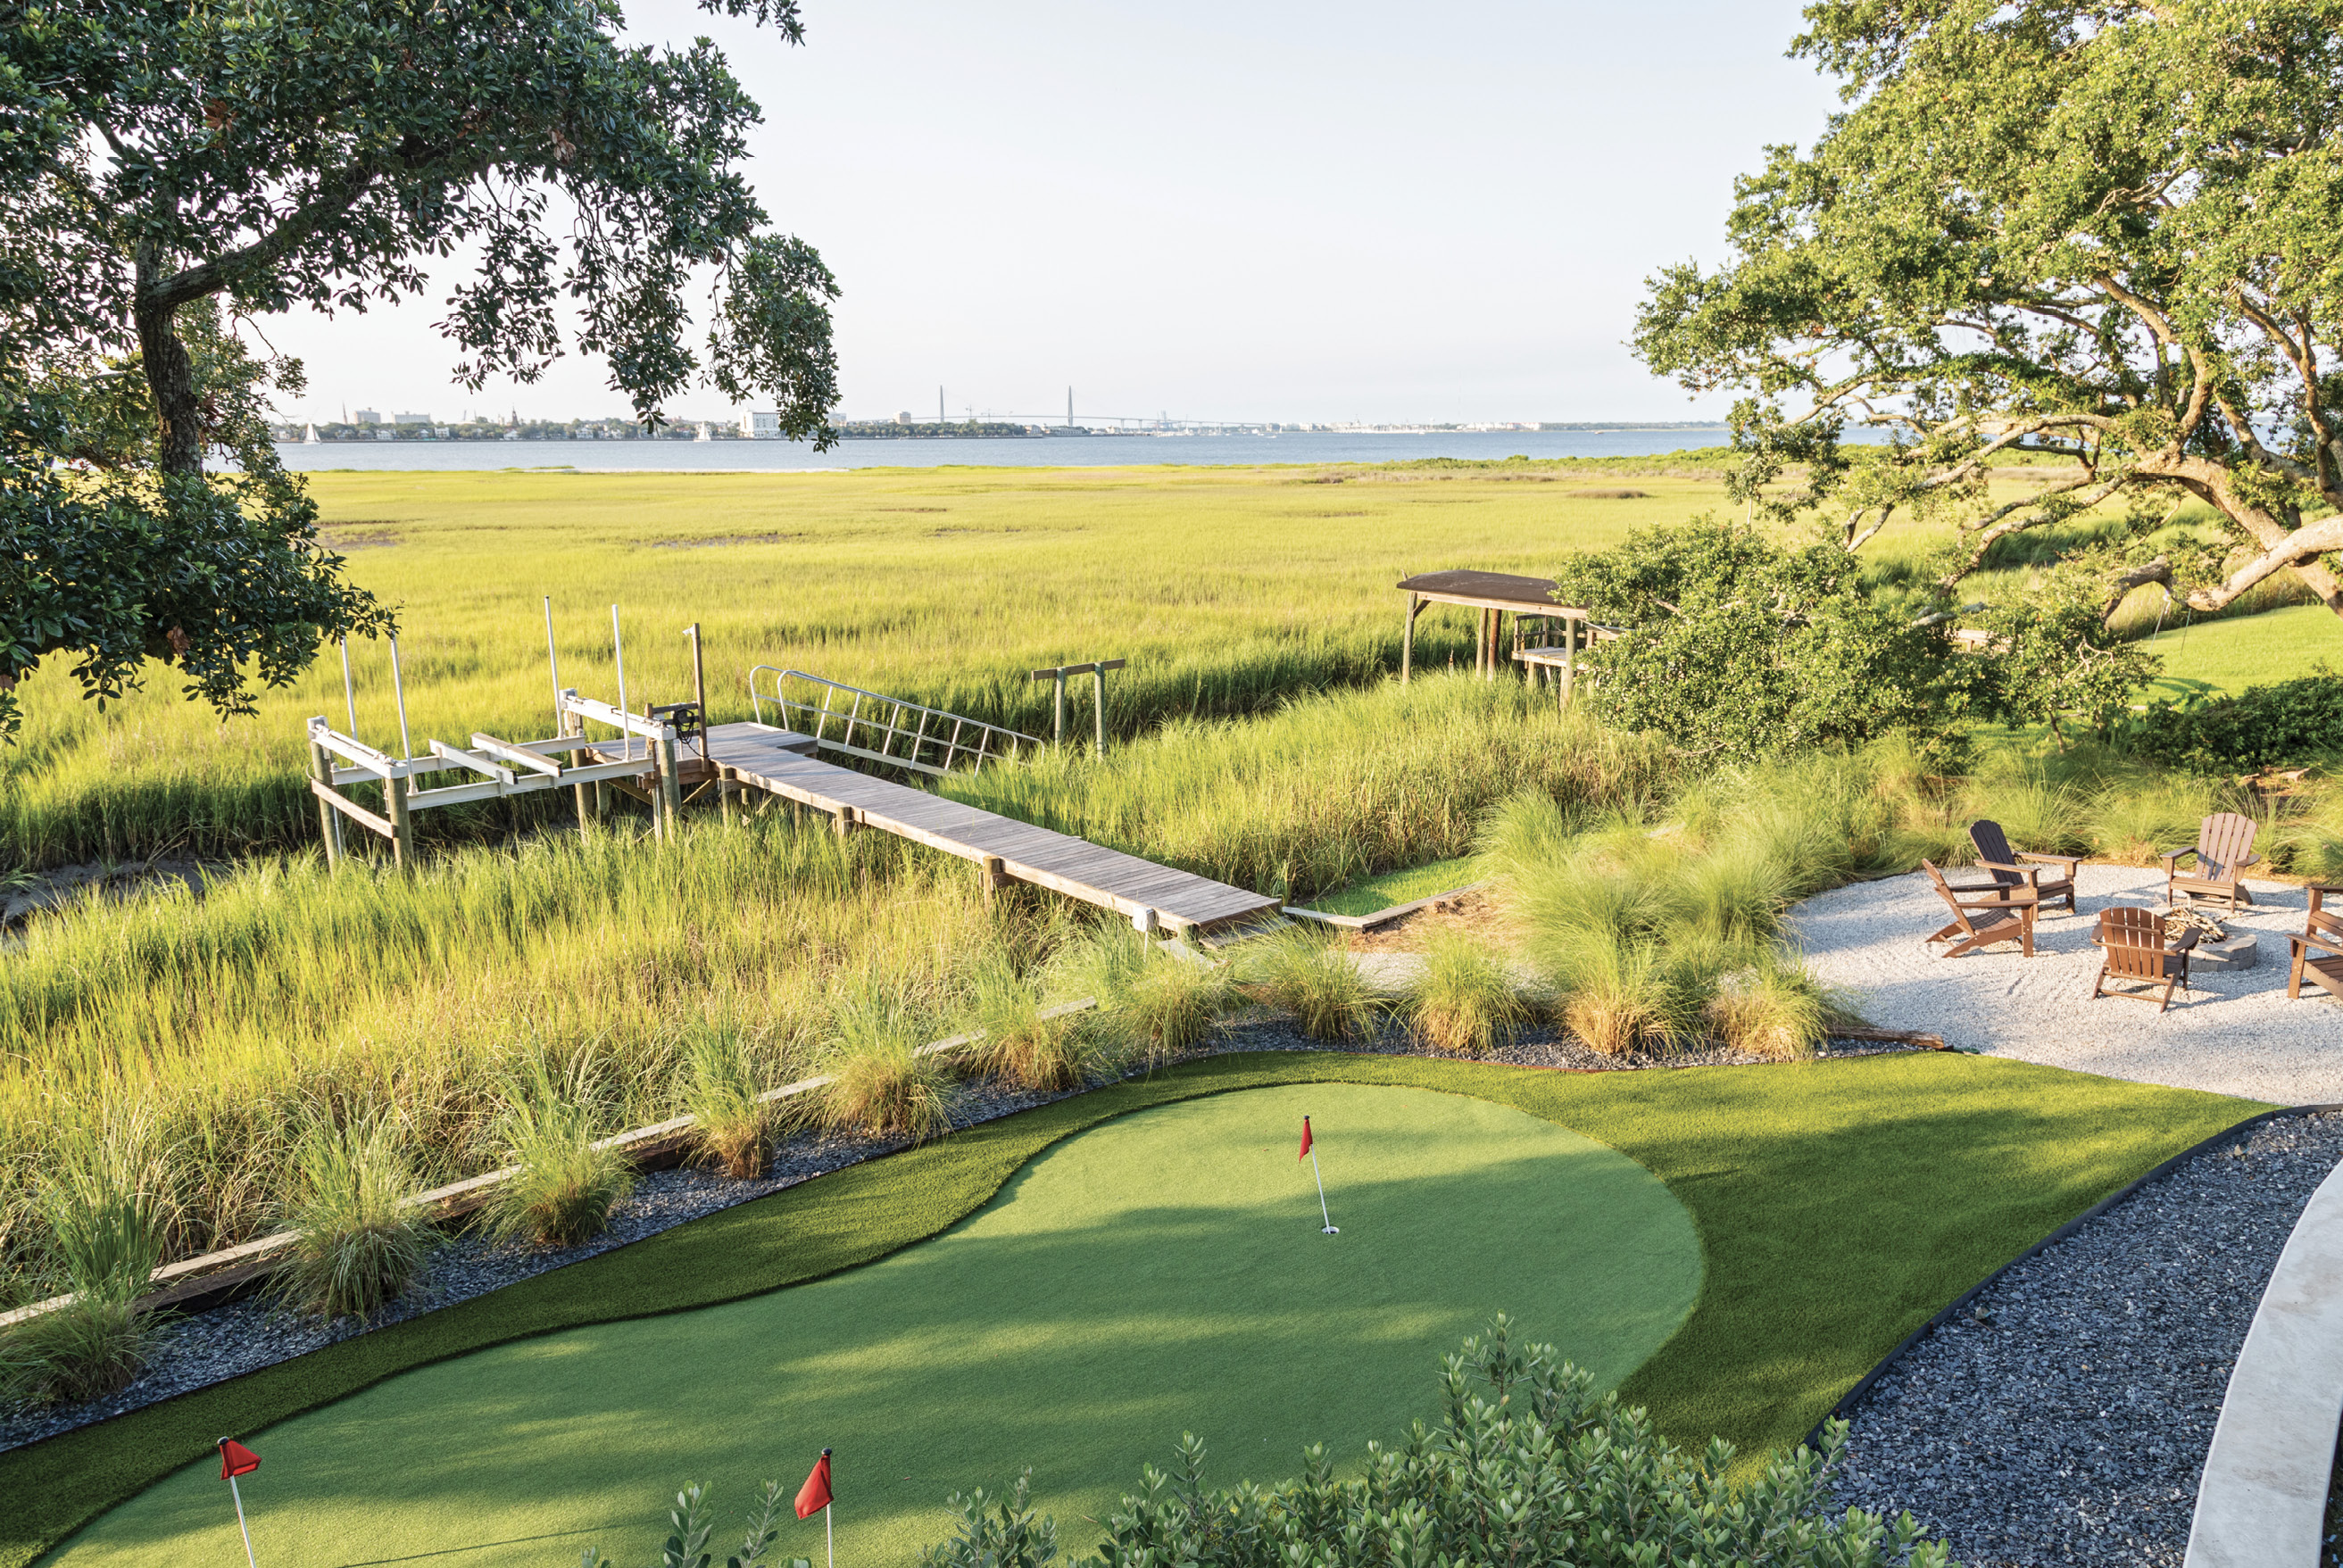 FORE FUN: Cade Miller with Graceful Gardens designed the landscape, including a putting green for Paul, a dedicated golfer.